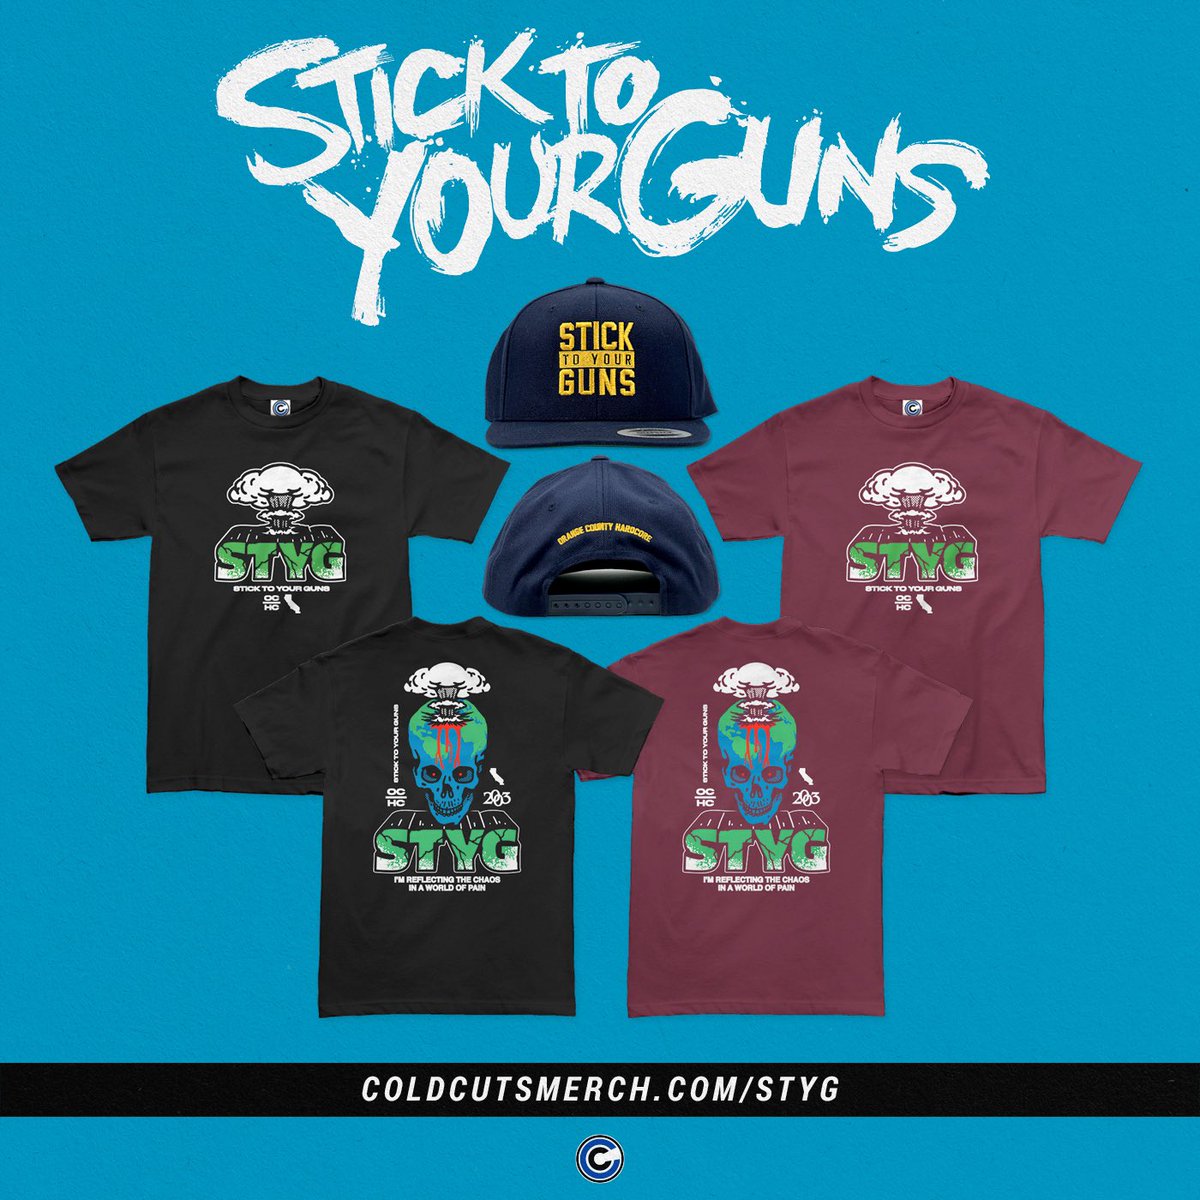 Some fresh merch over at @coldcutsmerch